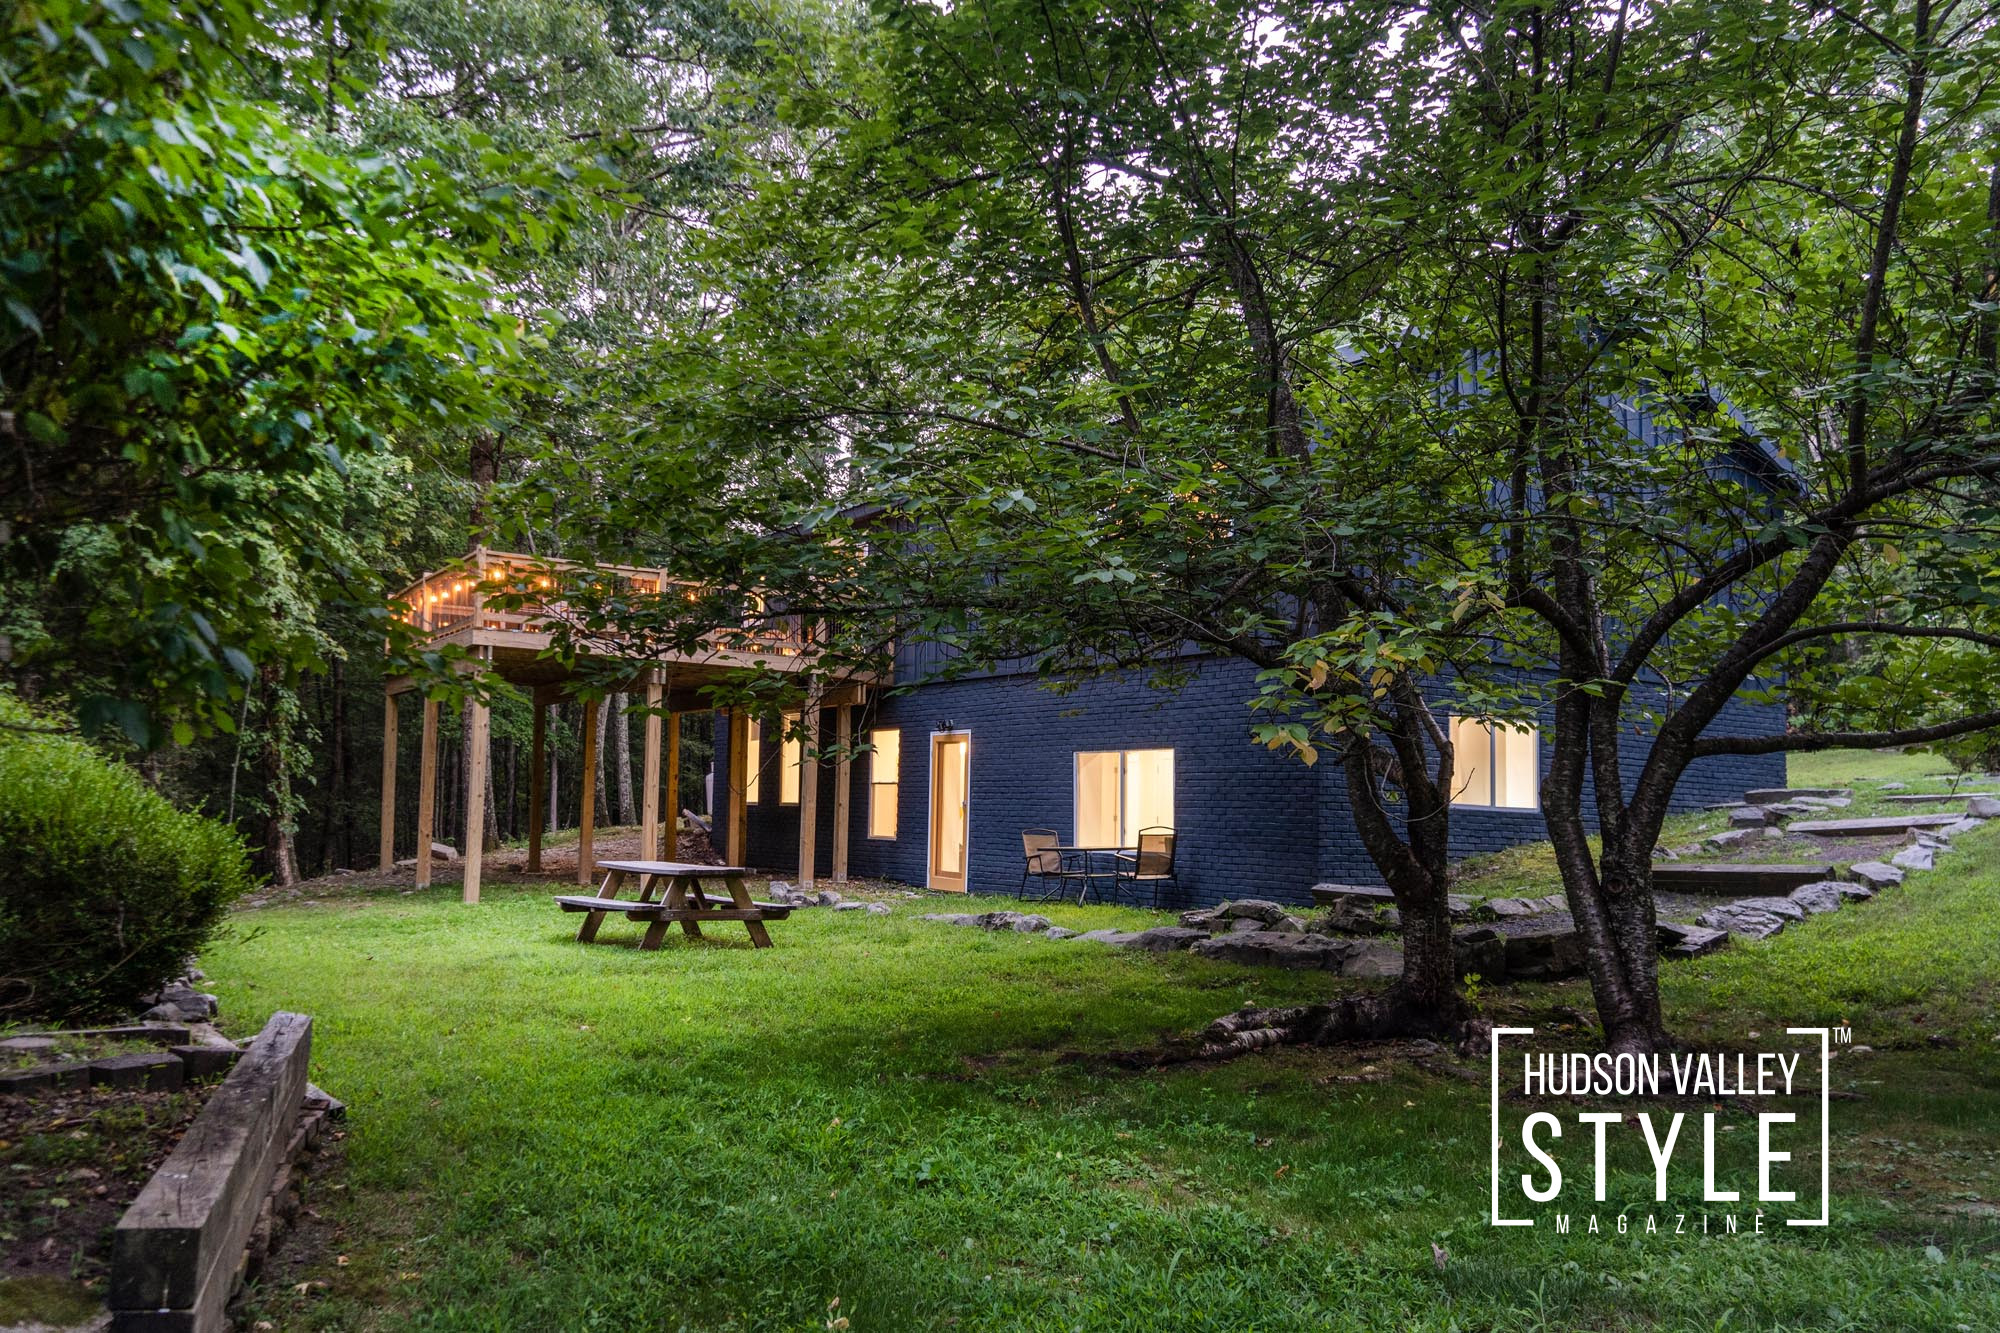 Good Vibes Only: A Review of an Upstate Airbnb Listing by Photographer Maxwell Alexander – Airbnb Photography for Duncan Avenue Studios (NYC) + Alluvion Media (Hudson Valley)